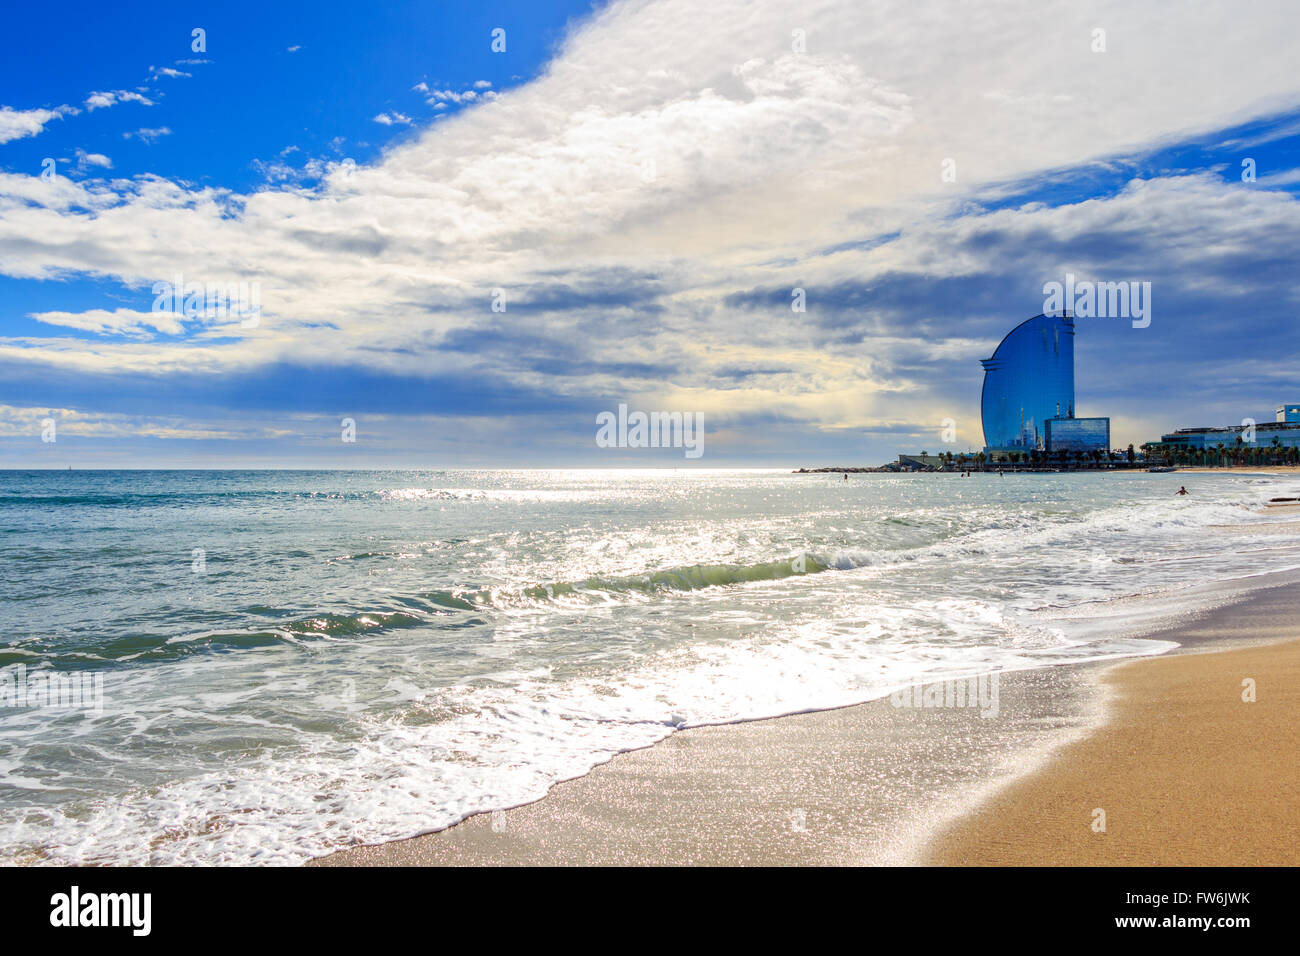 View of Barceloneta Beach in Barcelona, Spain. It is one of the most ...